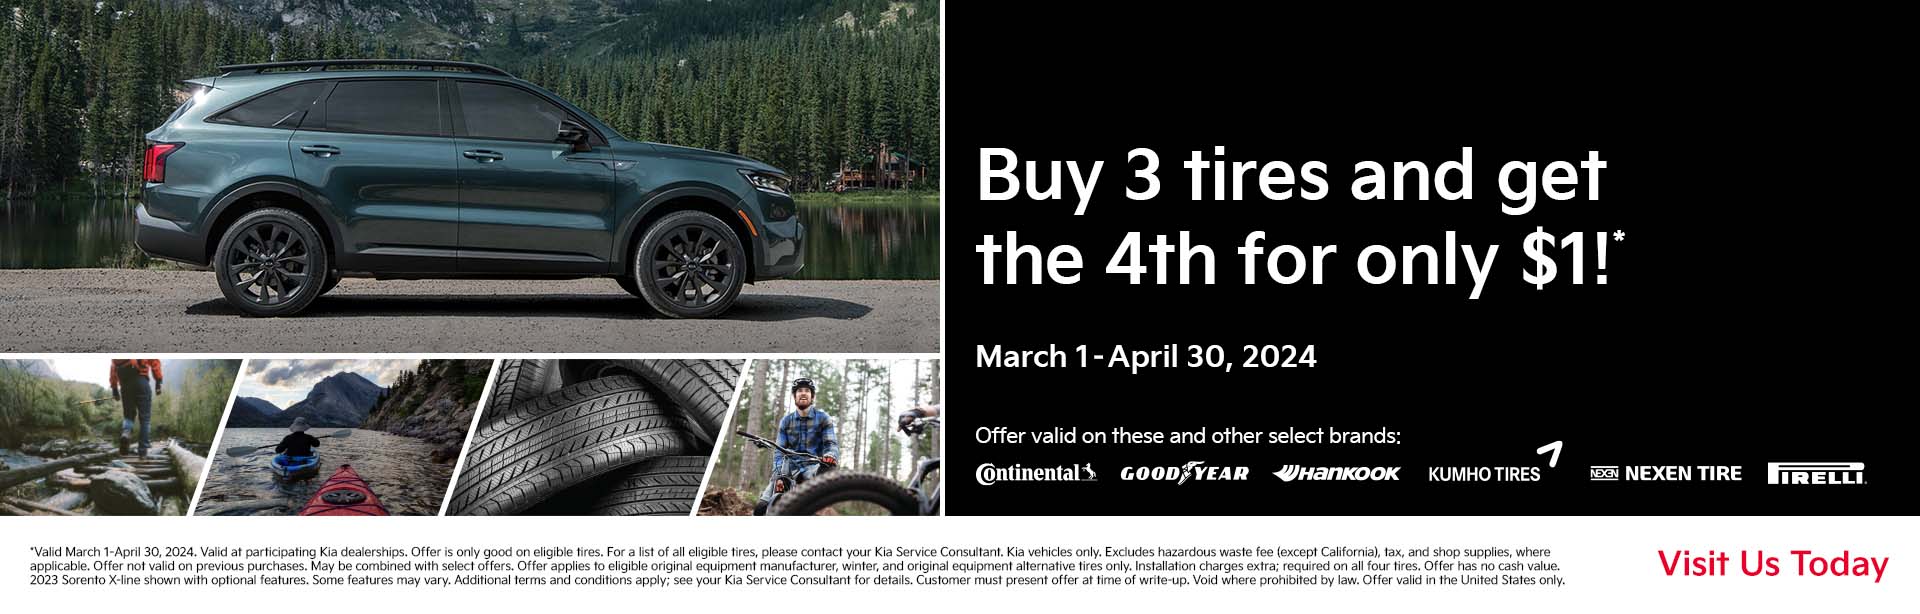 buy 3 tires, get 4th for $1